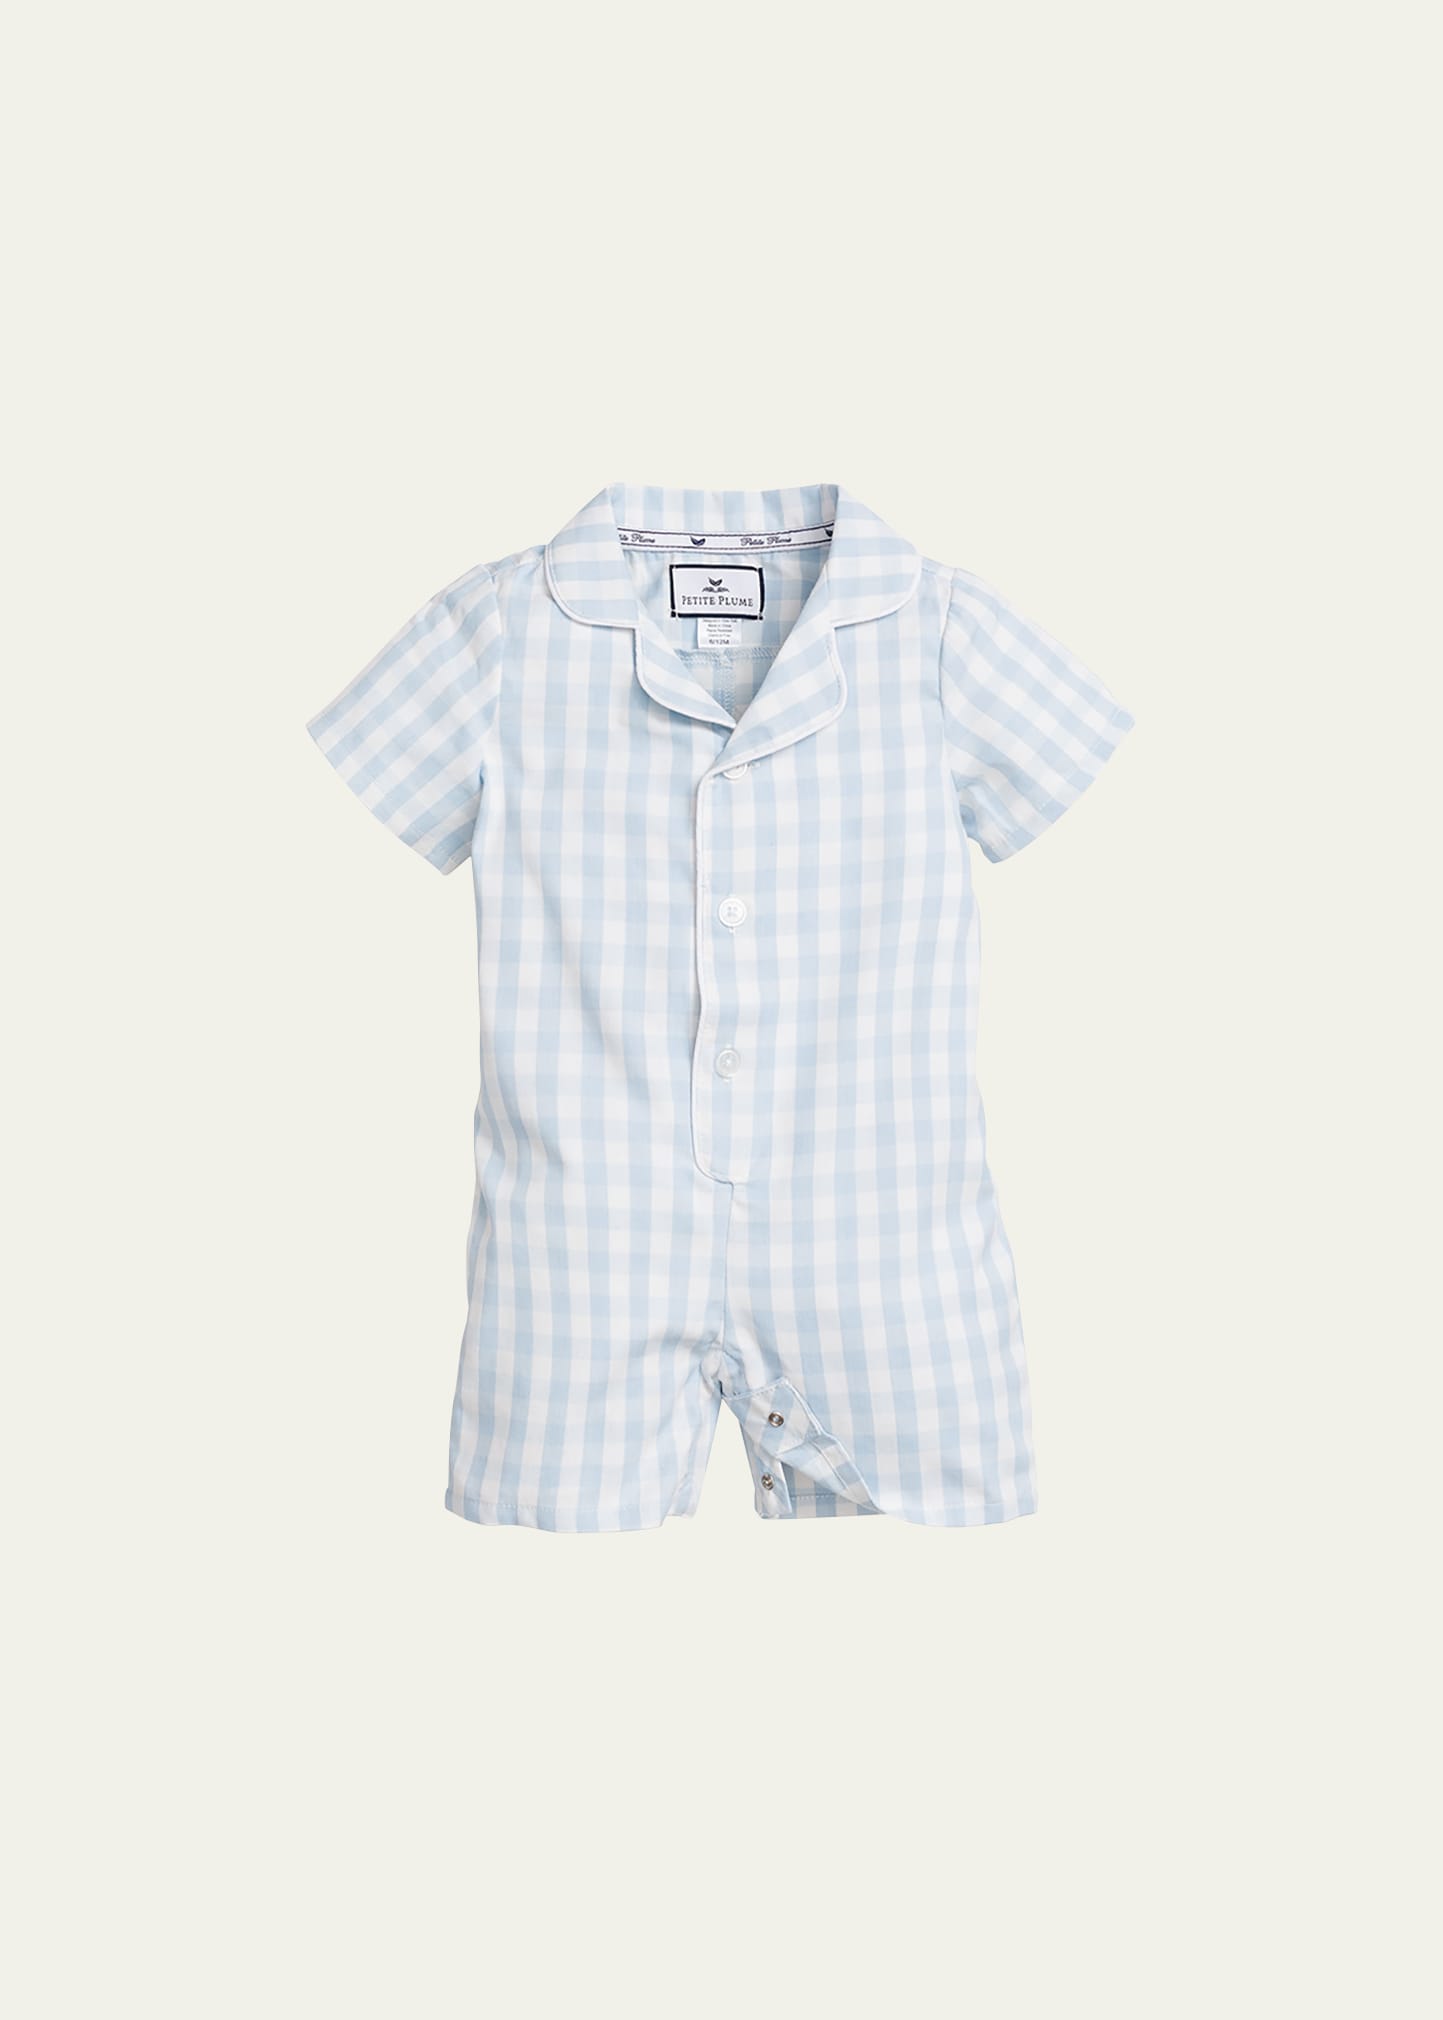 Kid's Gingham Romper w/ Contrast Piping, Size Newborn-24M Size